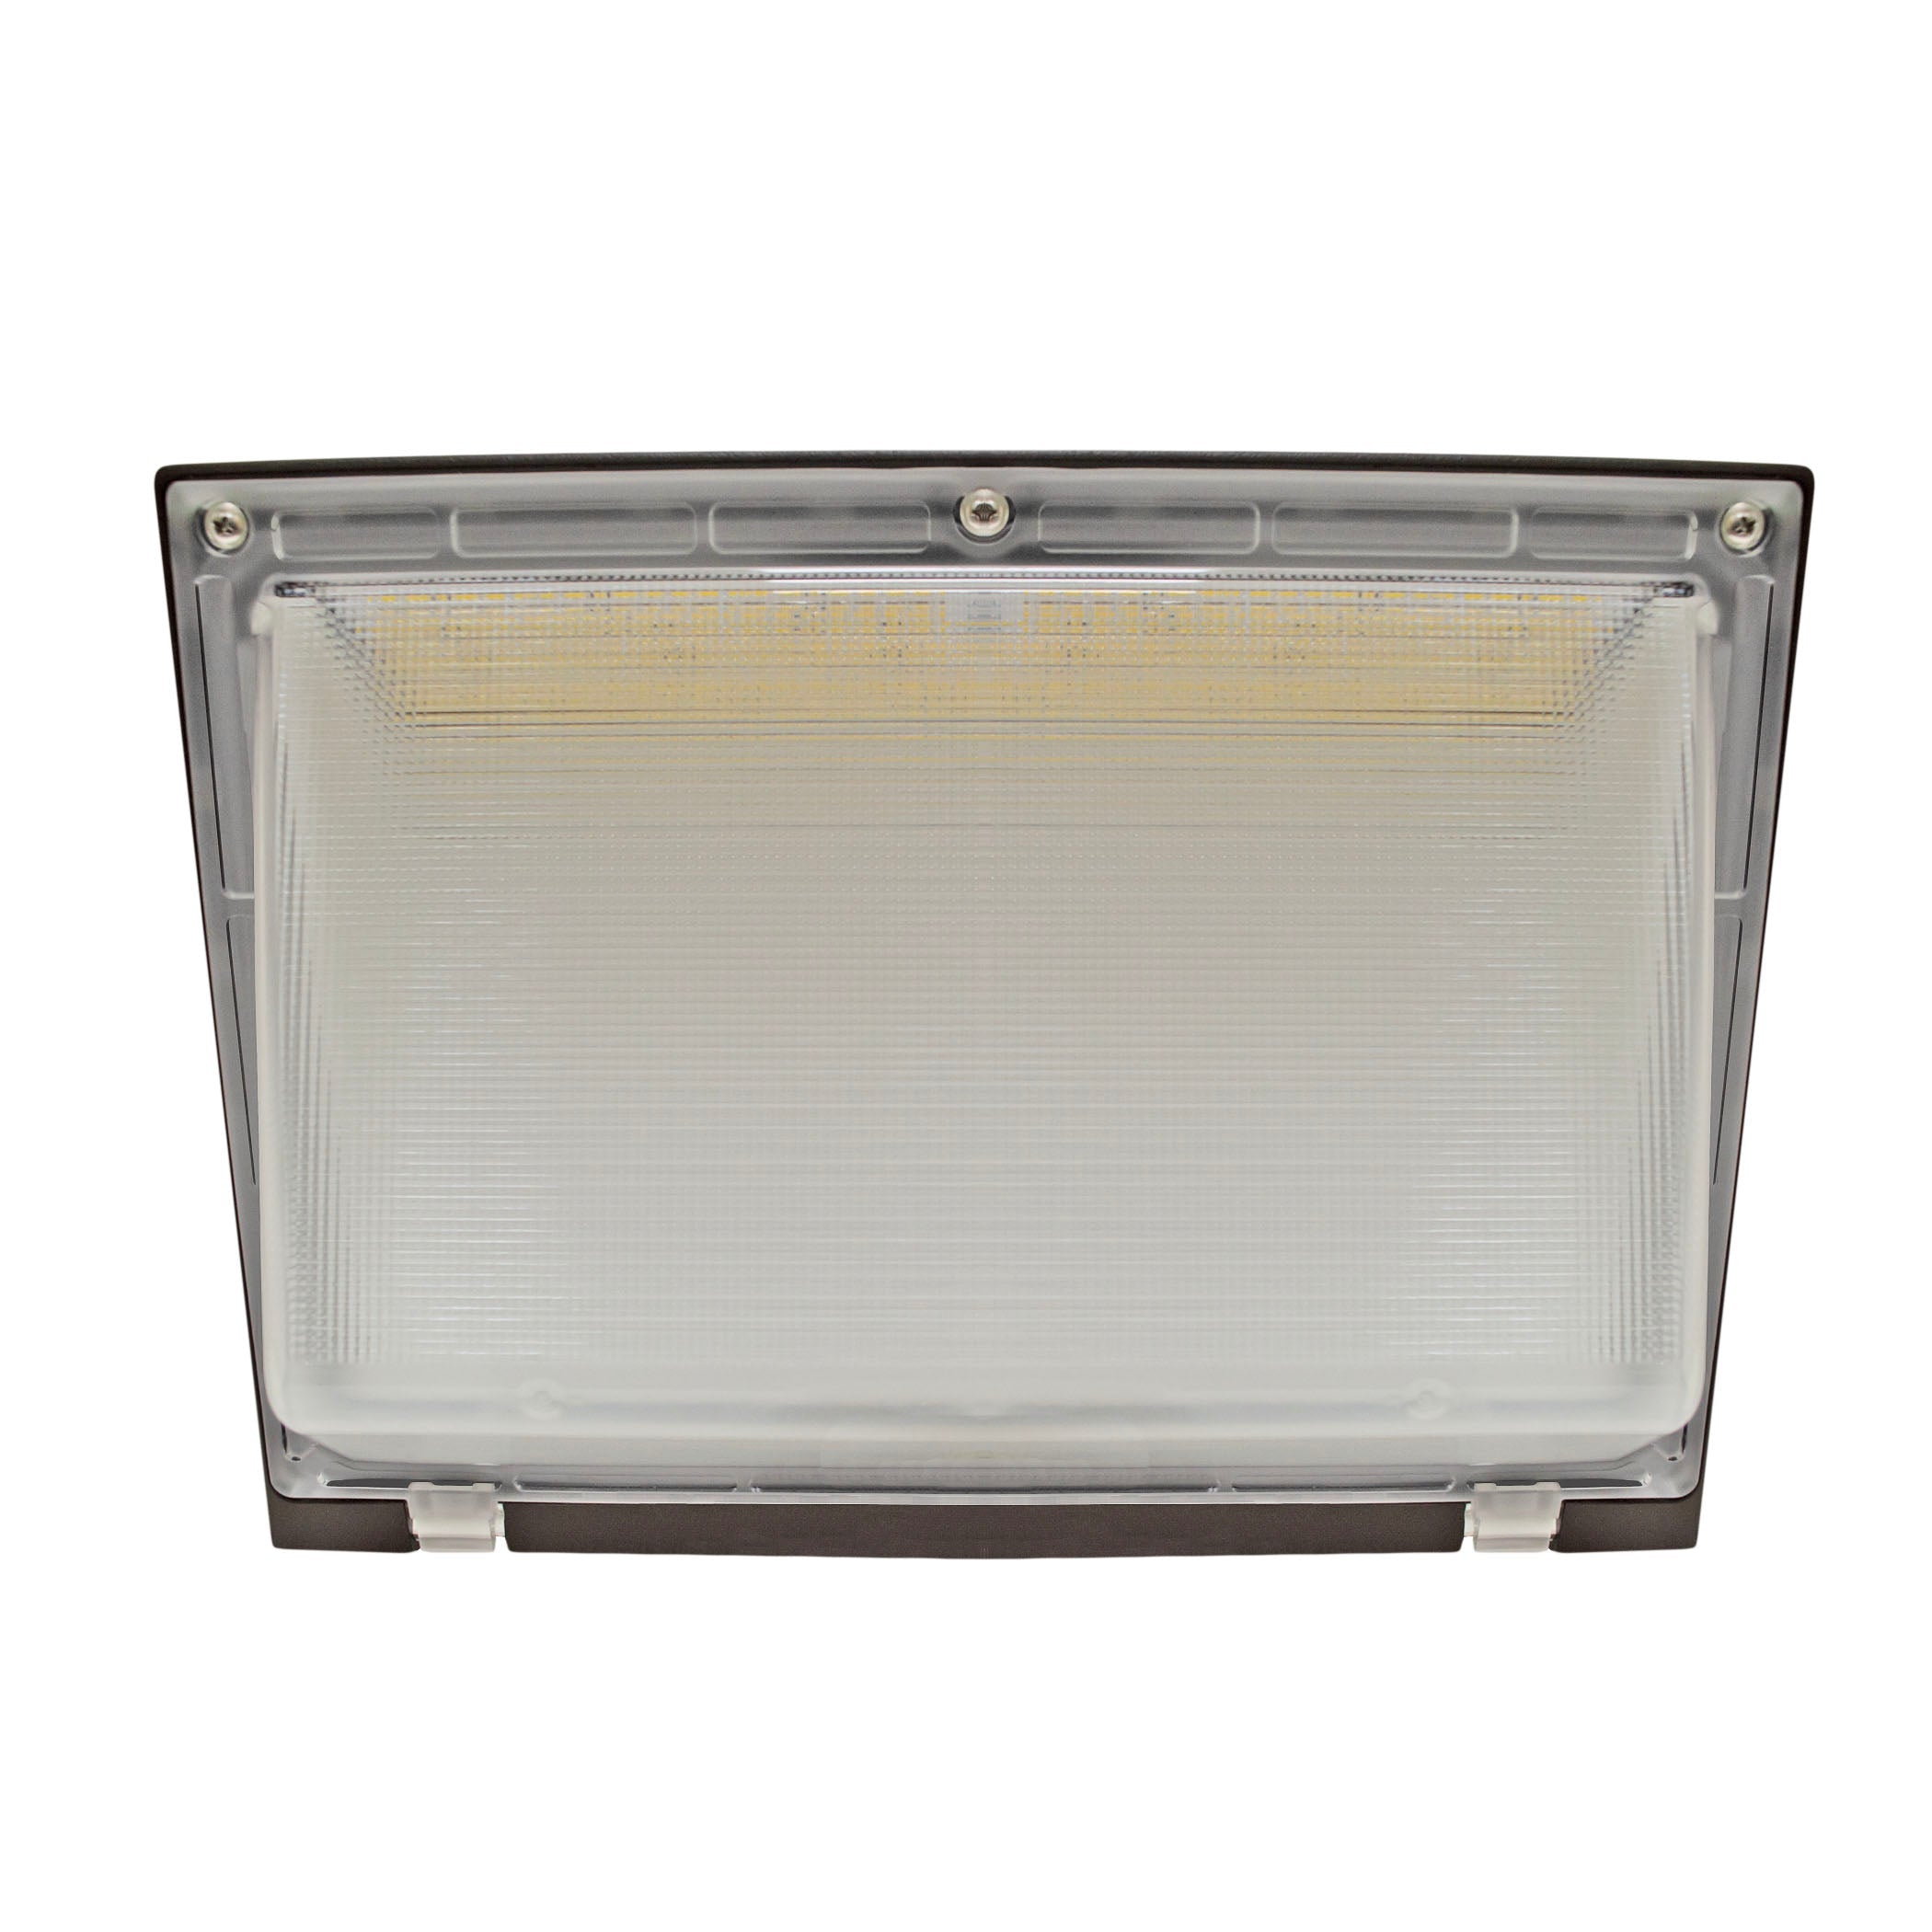 LED Wall Pack Light - 80W - 12,310 Lumens - Photocell Included - SWP4 - Forward Throw - DLC Listed